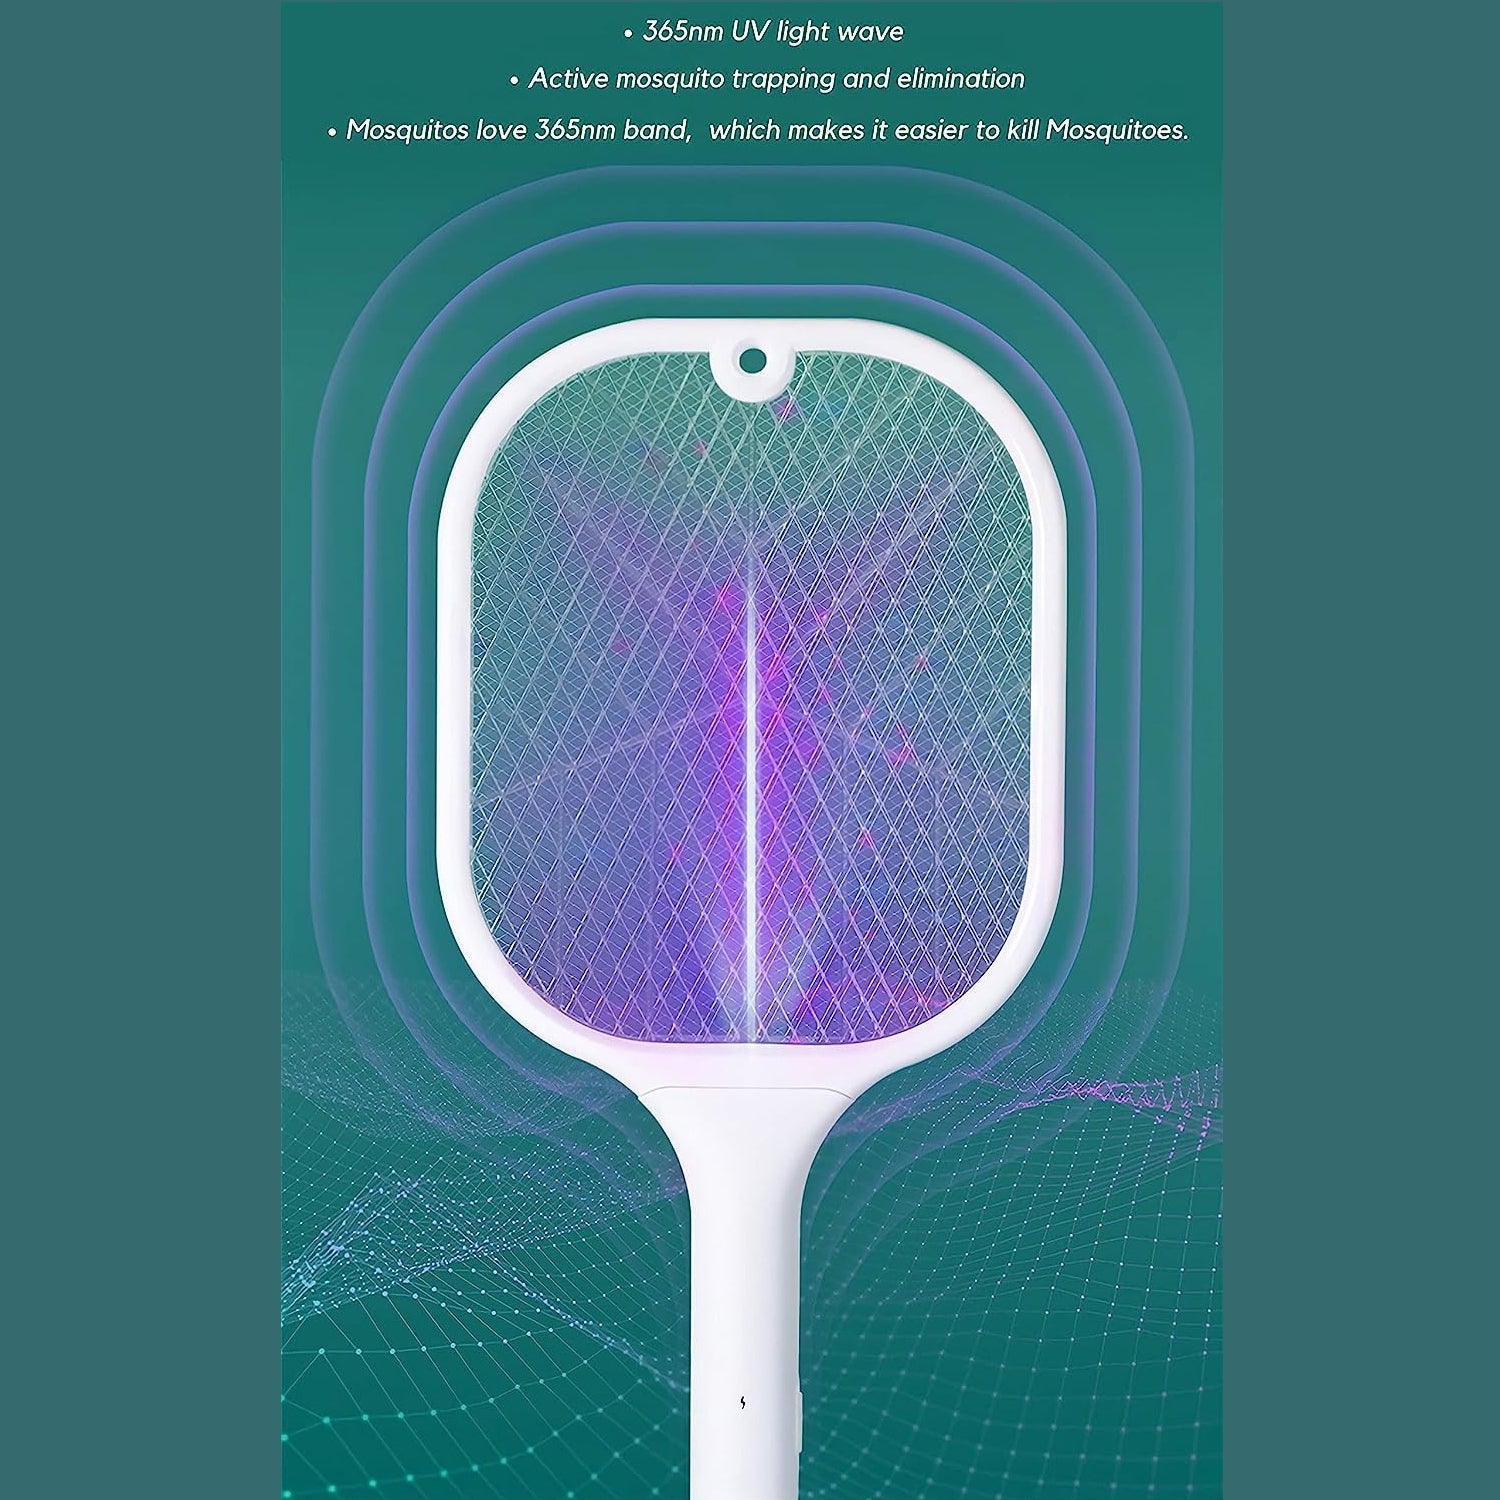 1747 Mosquito Killer Racket | Rechargeable Automatic Electric Fly Swatter | Mosquito Zapper Racket with UV Light Lamp | Mosquito Swatter with USB Charging Base | Electric Insect Killer Racket Machine Bat 